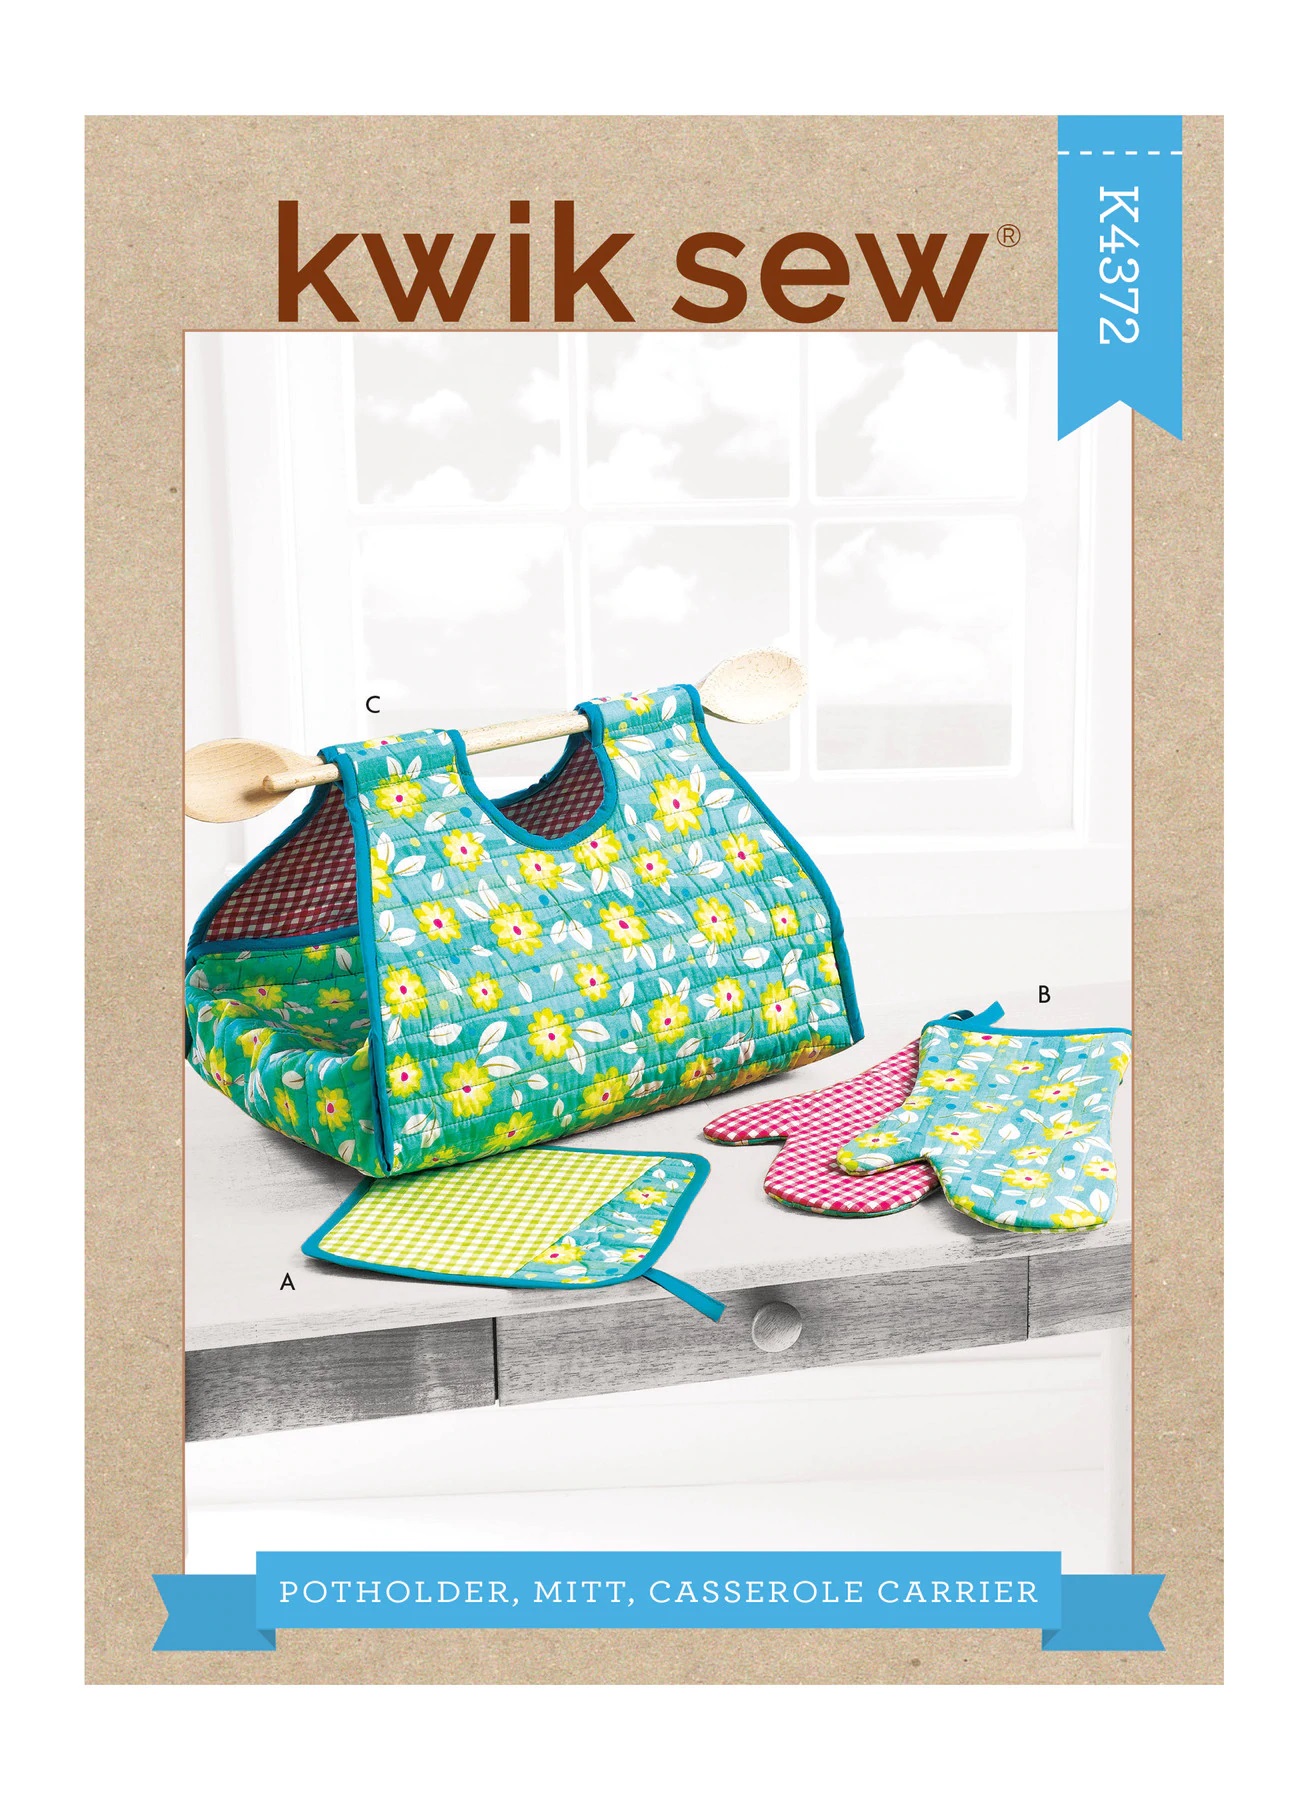 Kwik Sew 0152 Potholder and Appliance Covers